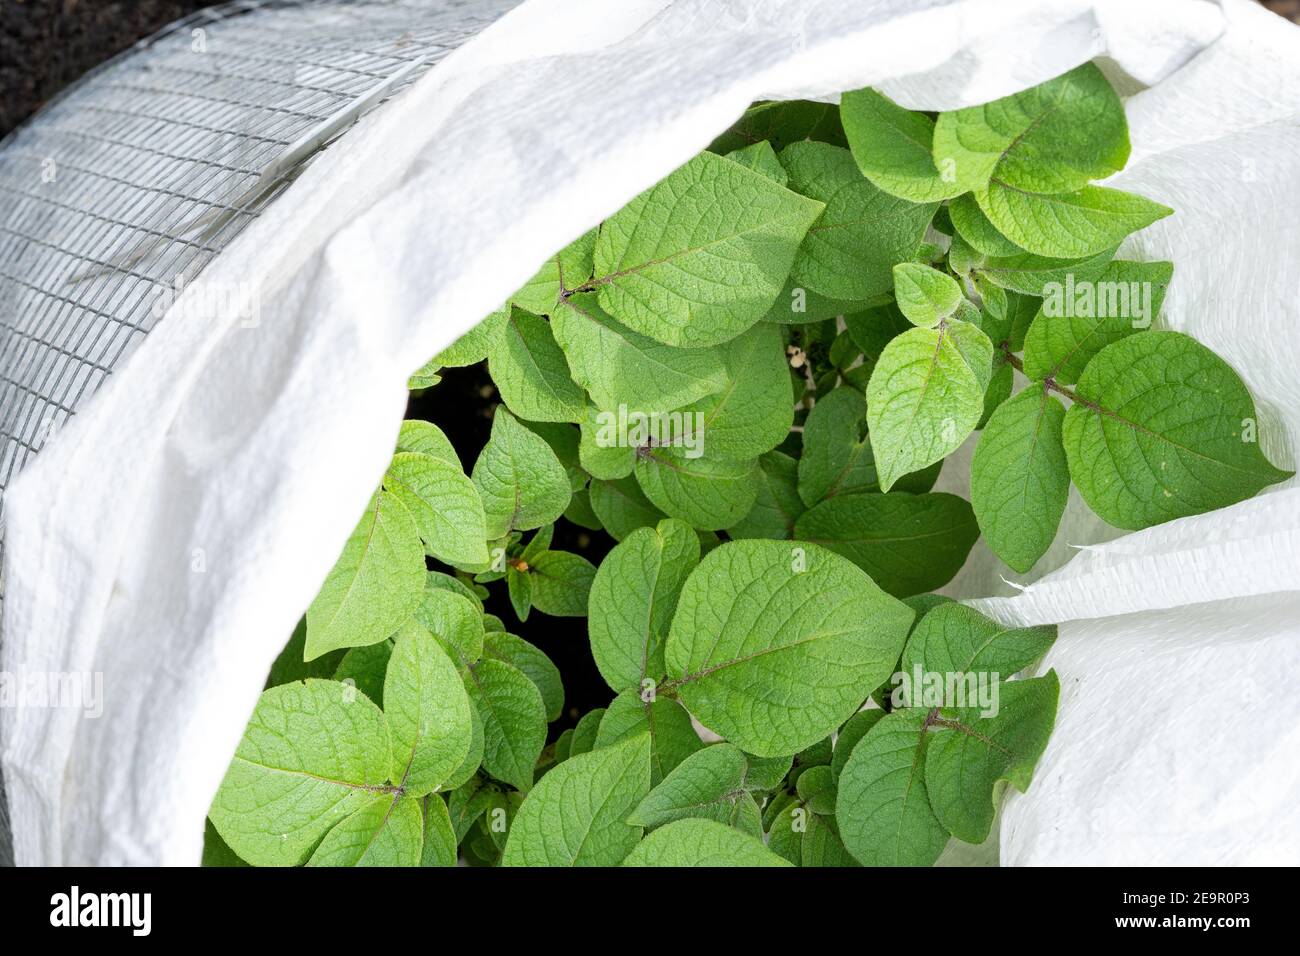 Issaquah, Washington, USA.  Overhead view of potatoes growing in a homemade cage. Stock Photo